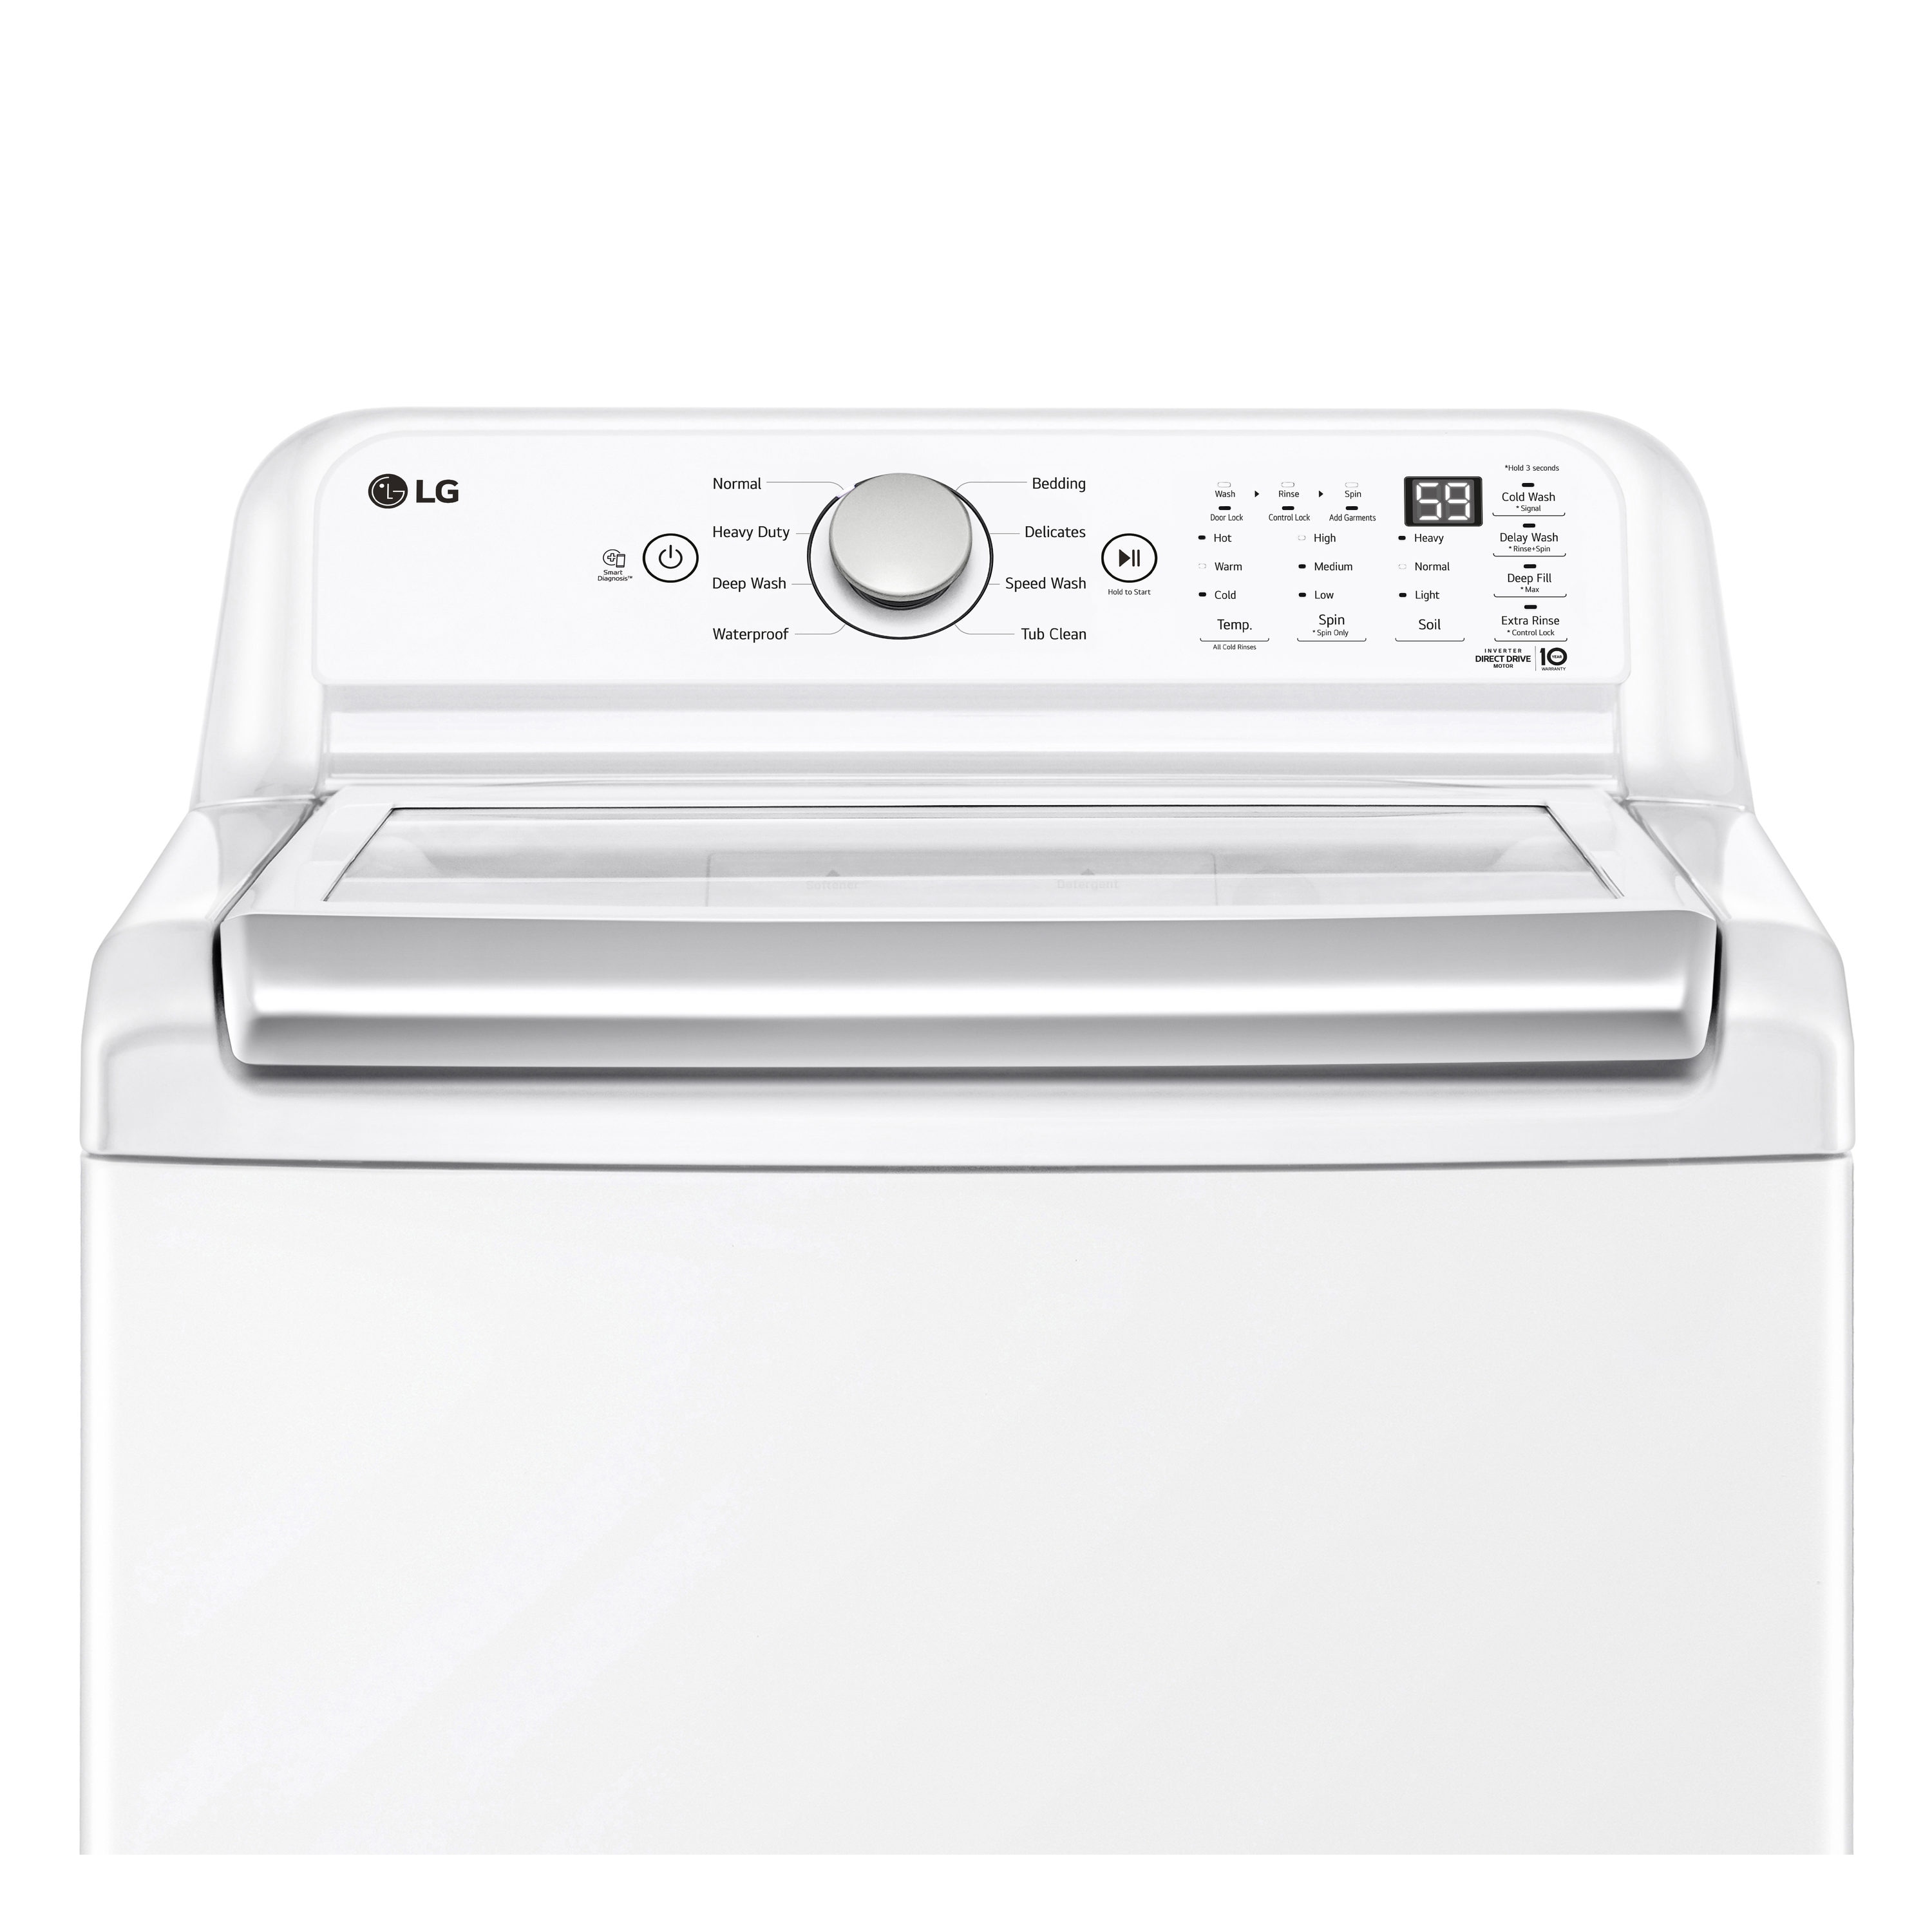 LG WT7005CW 4.3 cu. ft. Top Load Washer with 4-Way™ Agitator &  TurboDrum™ - White